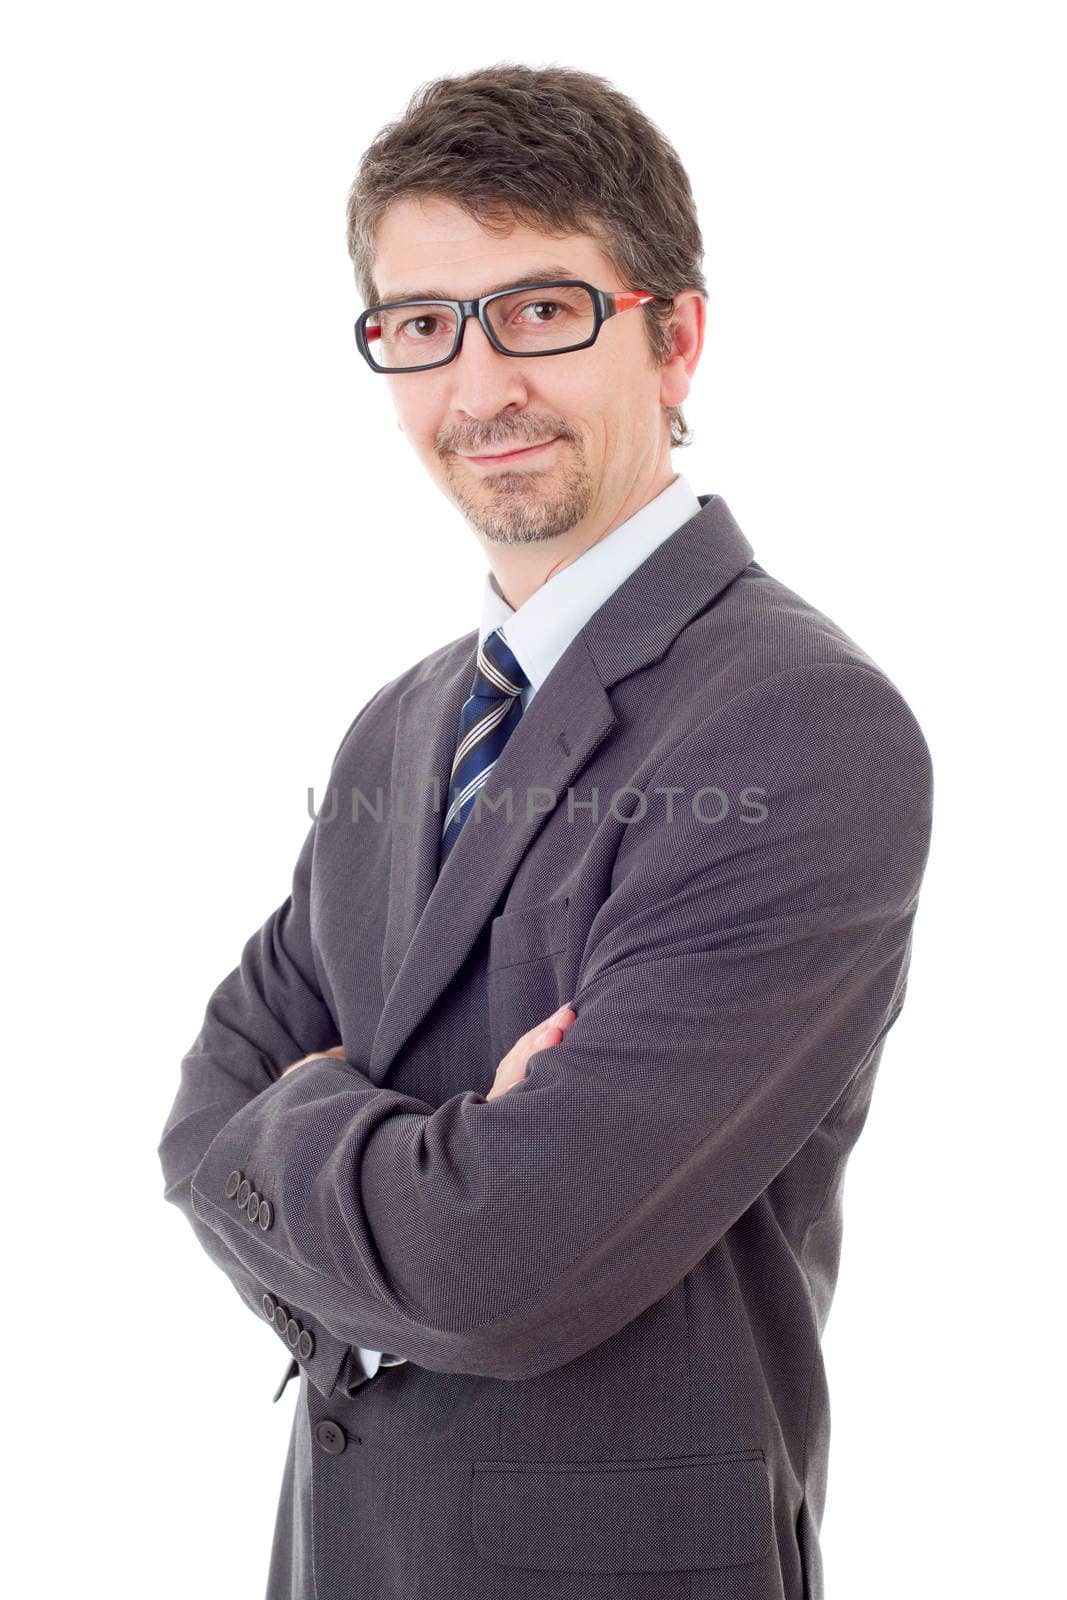 young business man portrait isolated on white